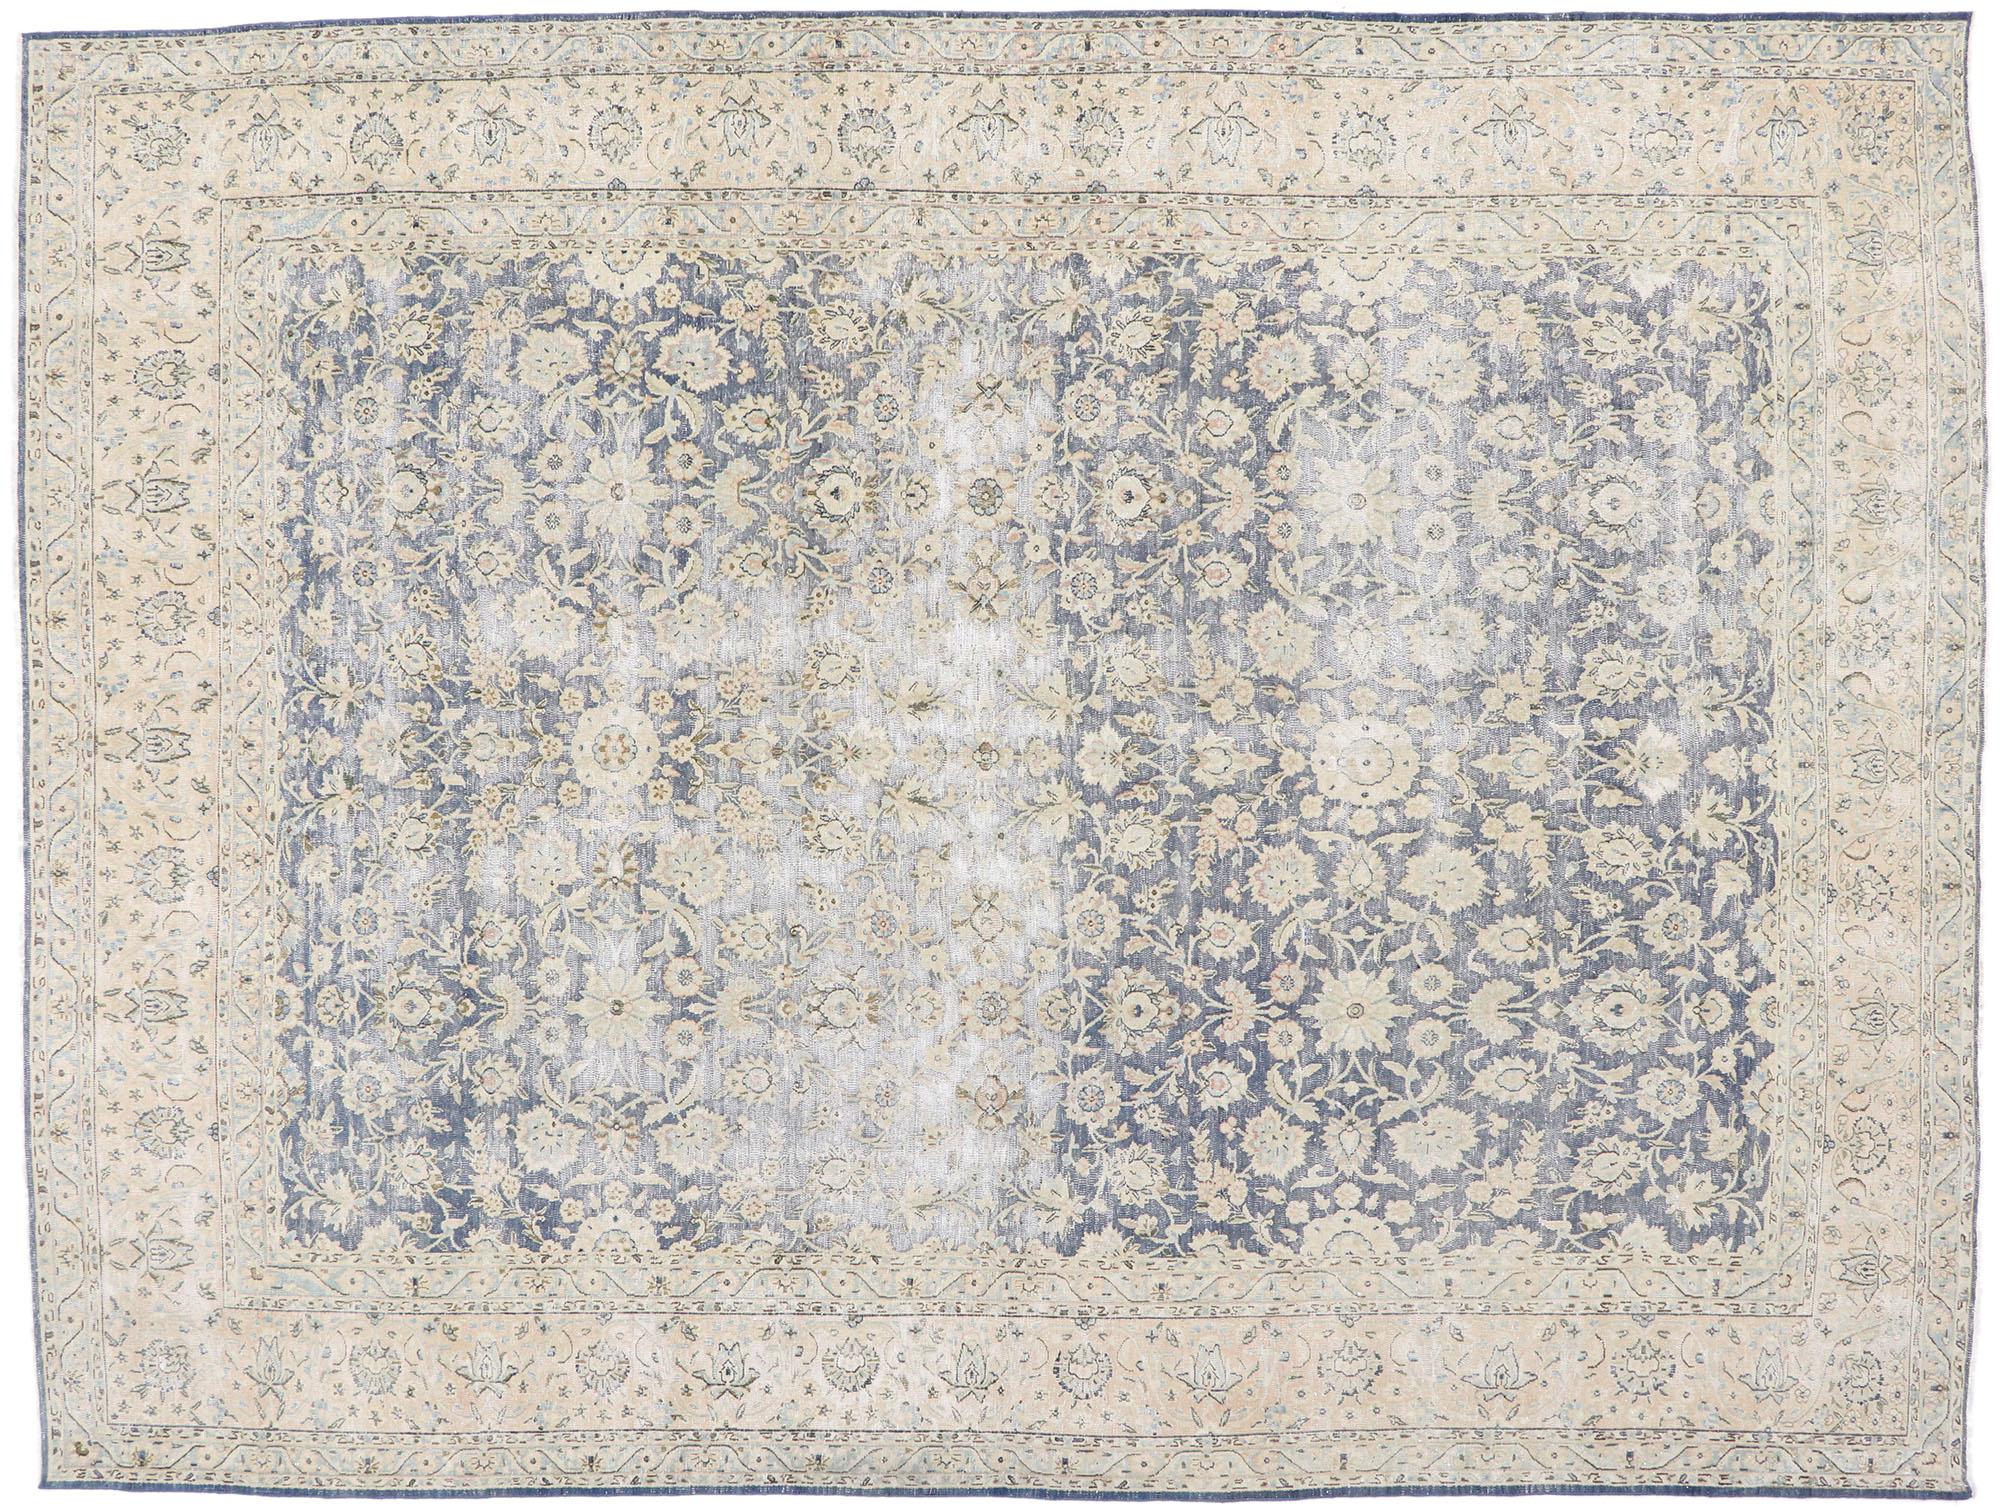 Distressed Antique Persian Kerman Rug with Rustic French Cottage Style For Sale 2